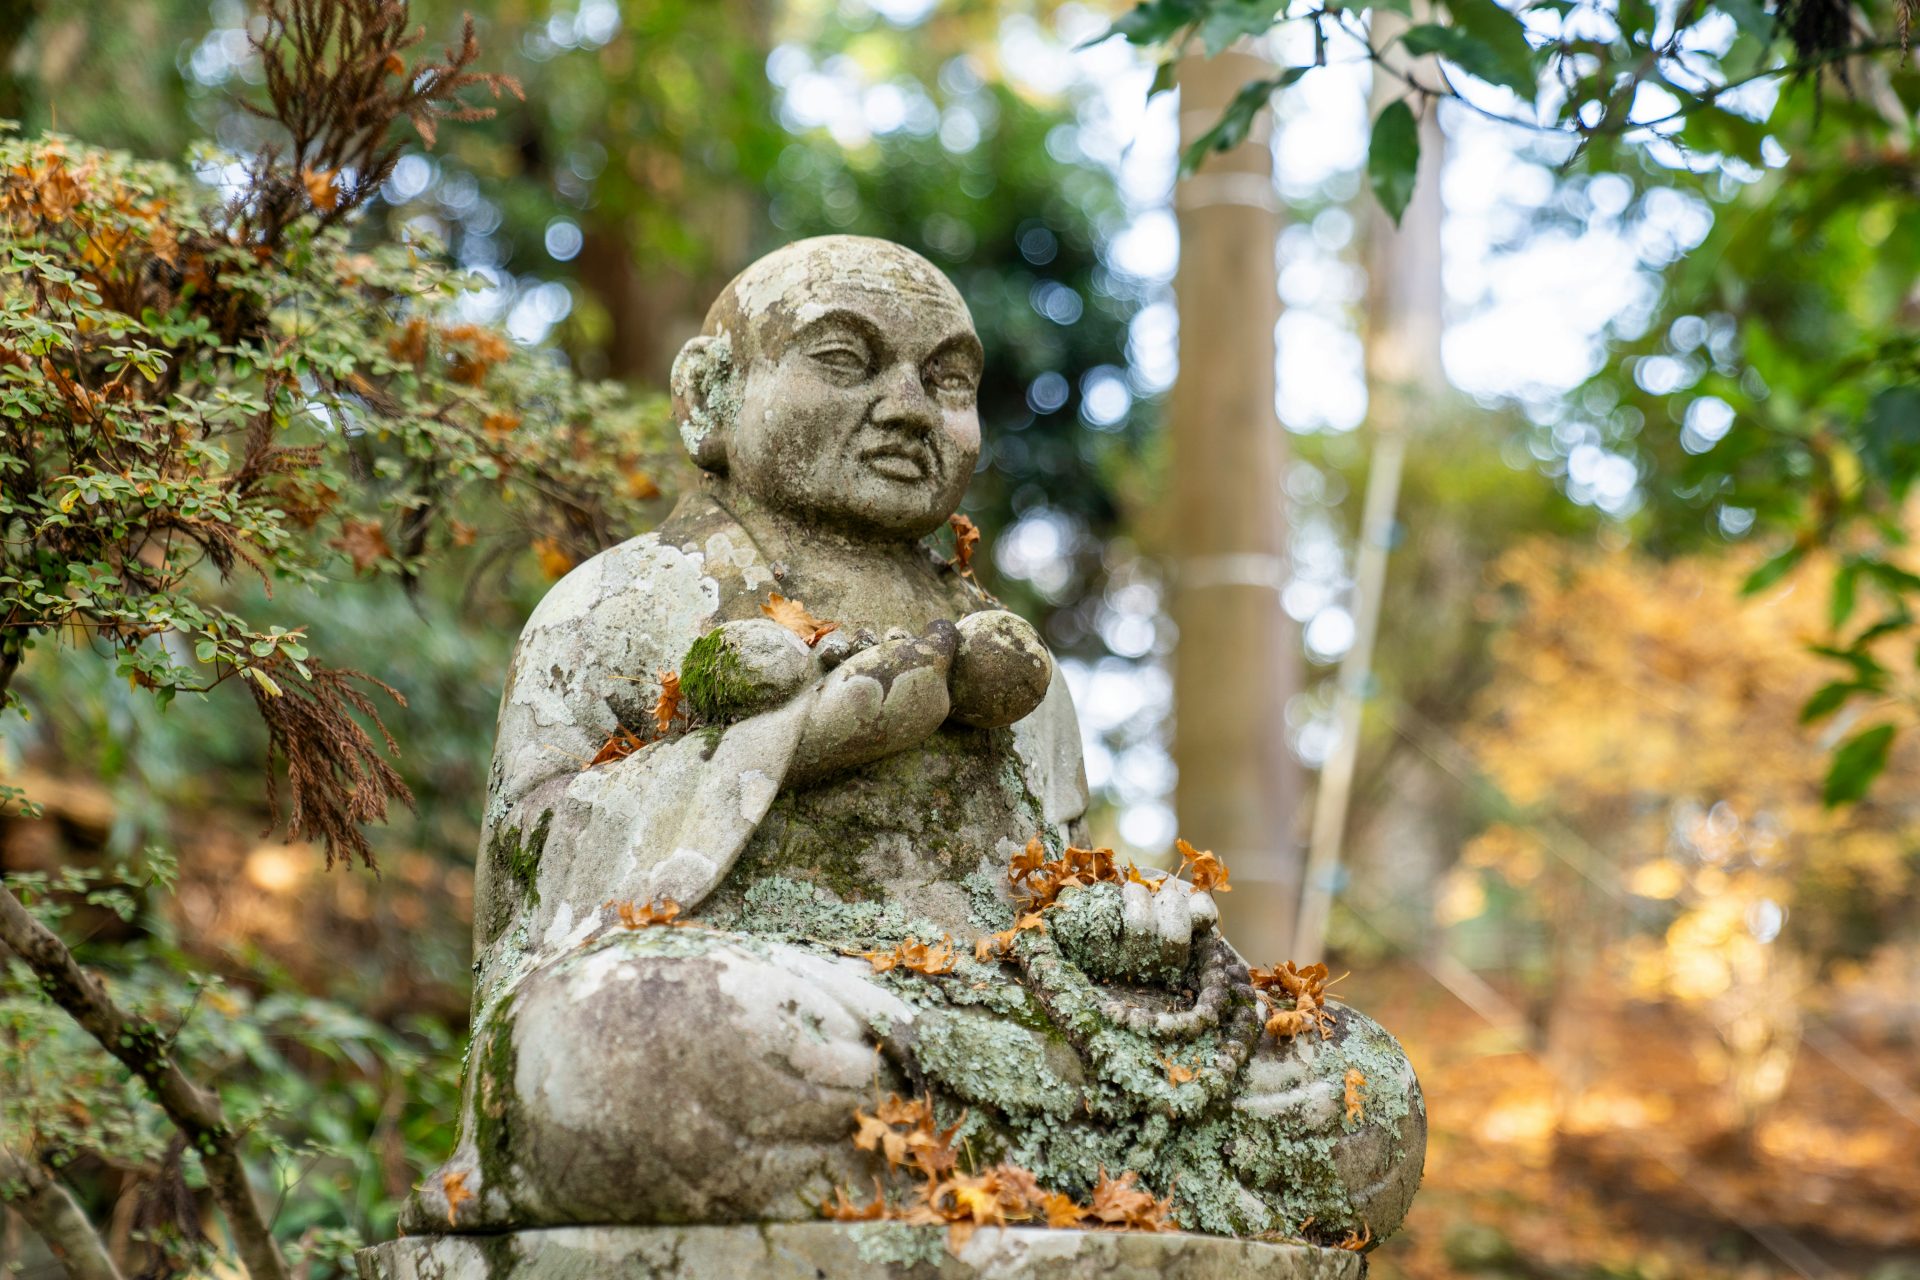 <p>Shikoku is a place of pilgrimage. They say that if you visit the 88 sacred sites associated with Kukai Buddhism, your earthly desires will disappear and your wishes will come true.</p> <p>Image: Hendrik Morkel / Unsplash</p>